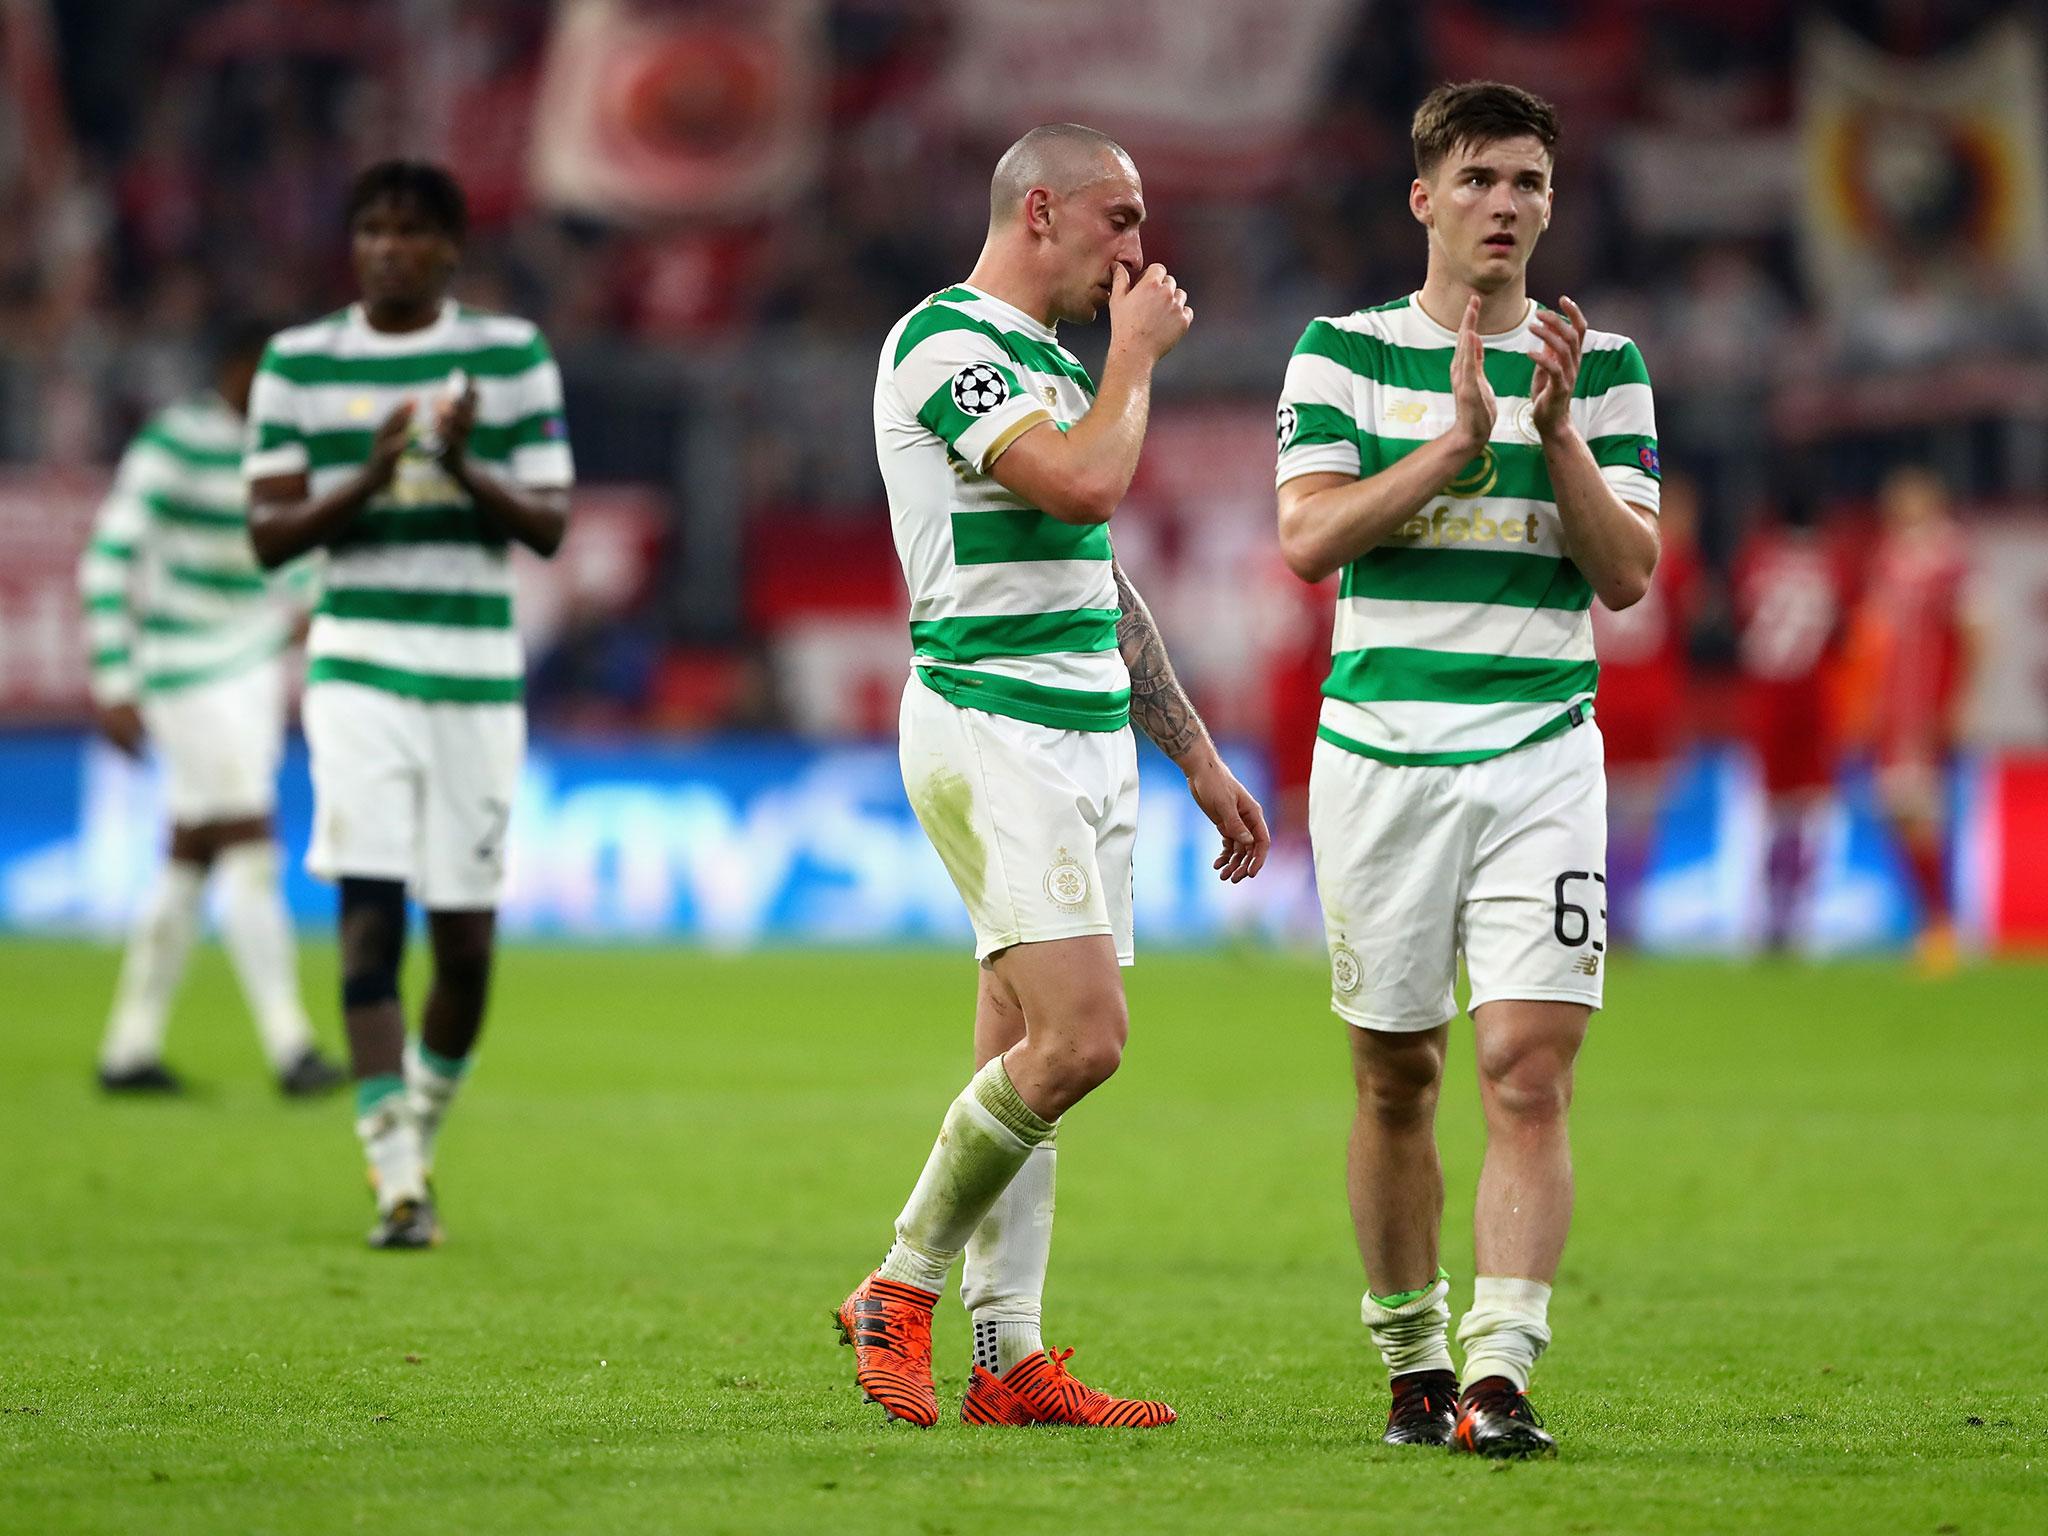 Celtic's players react after the final whistle in Munich